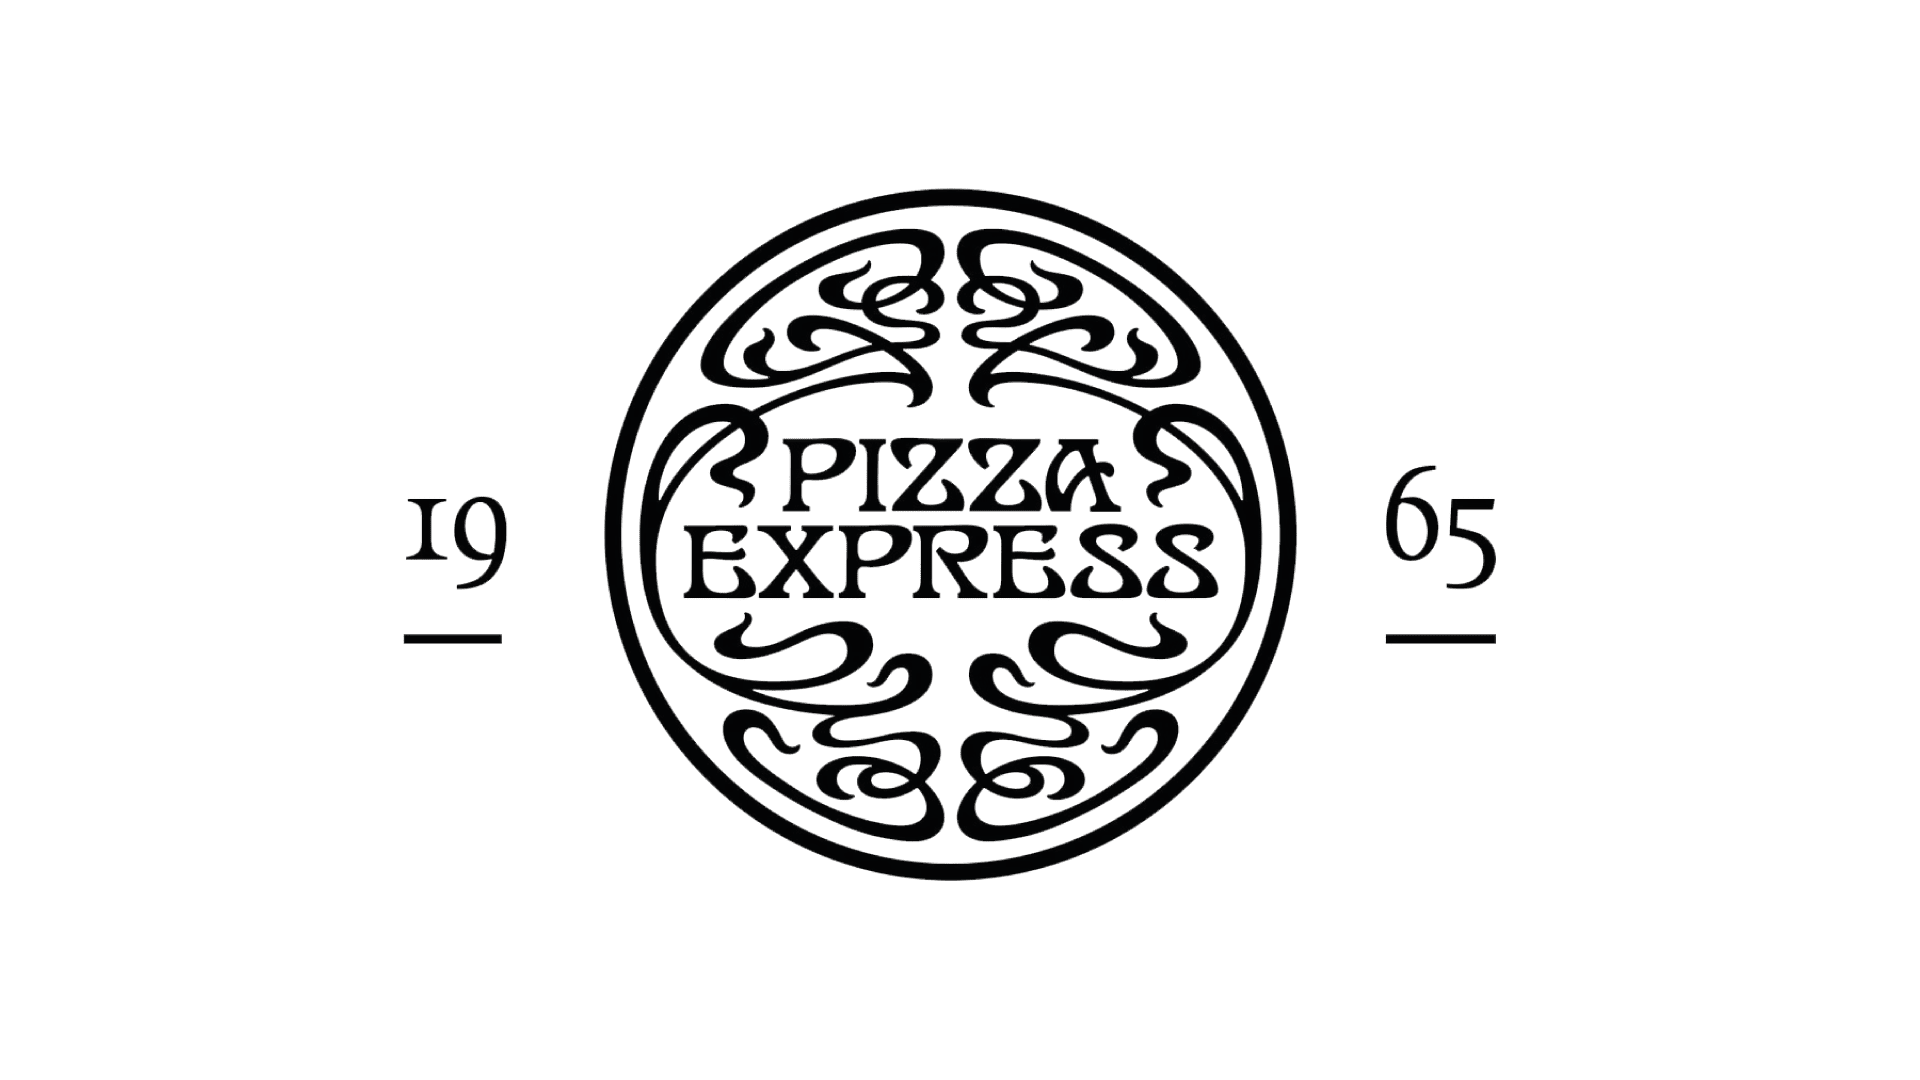 Pizza Express works with CADS